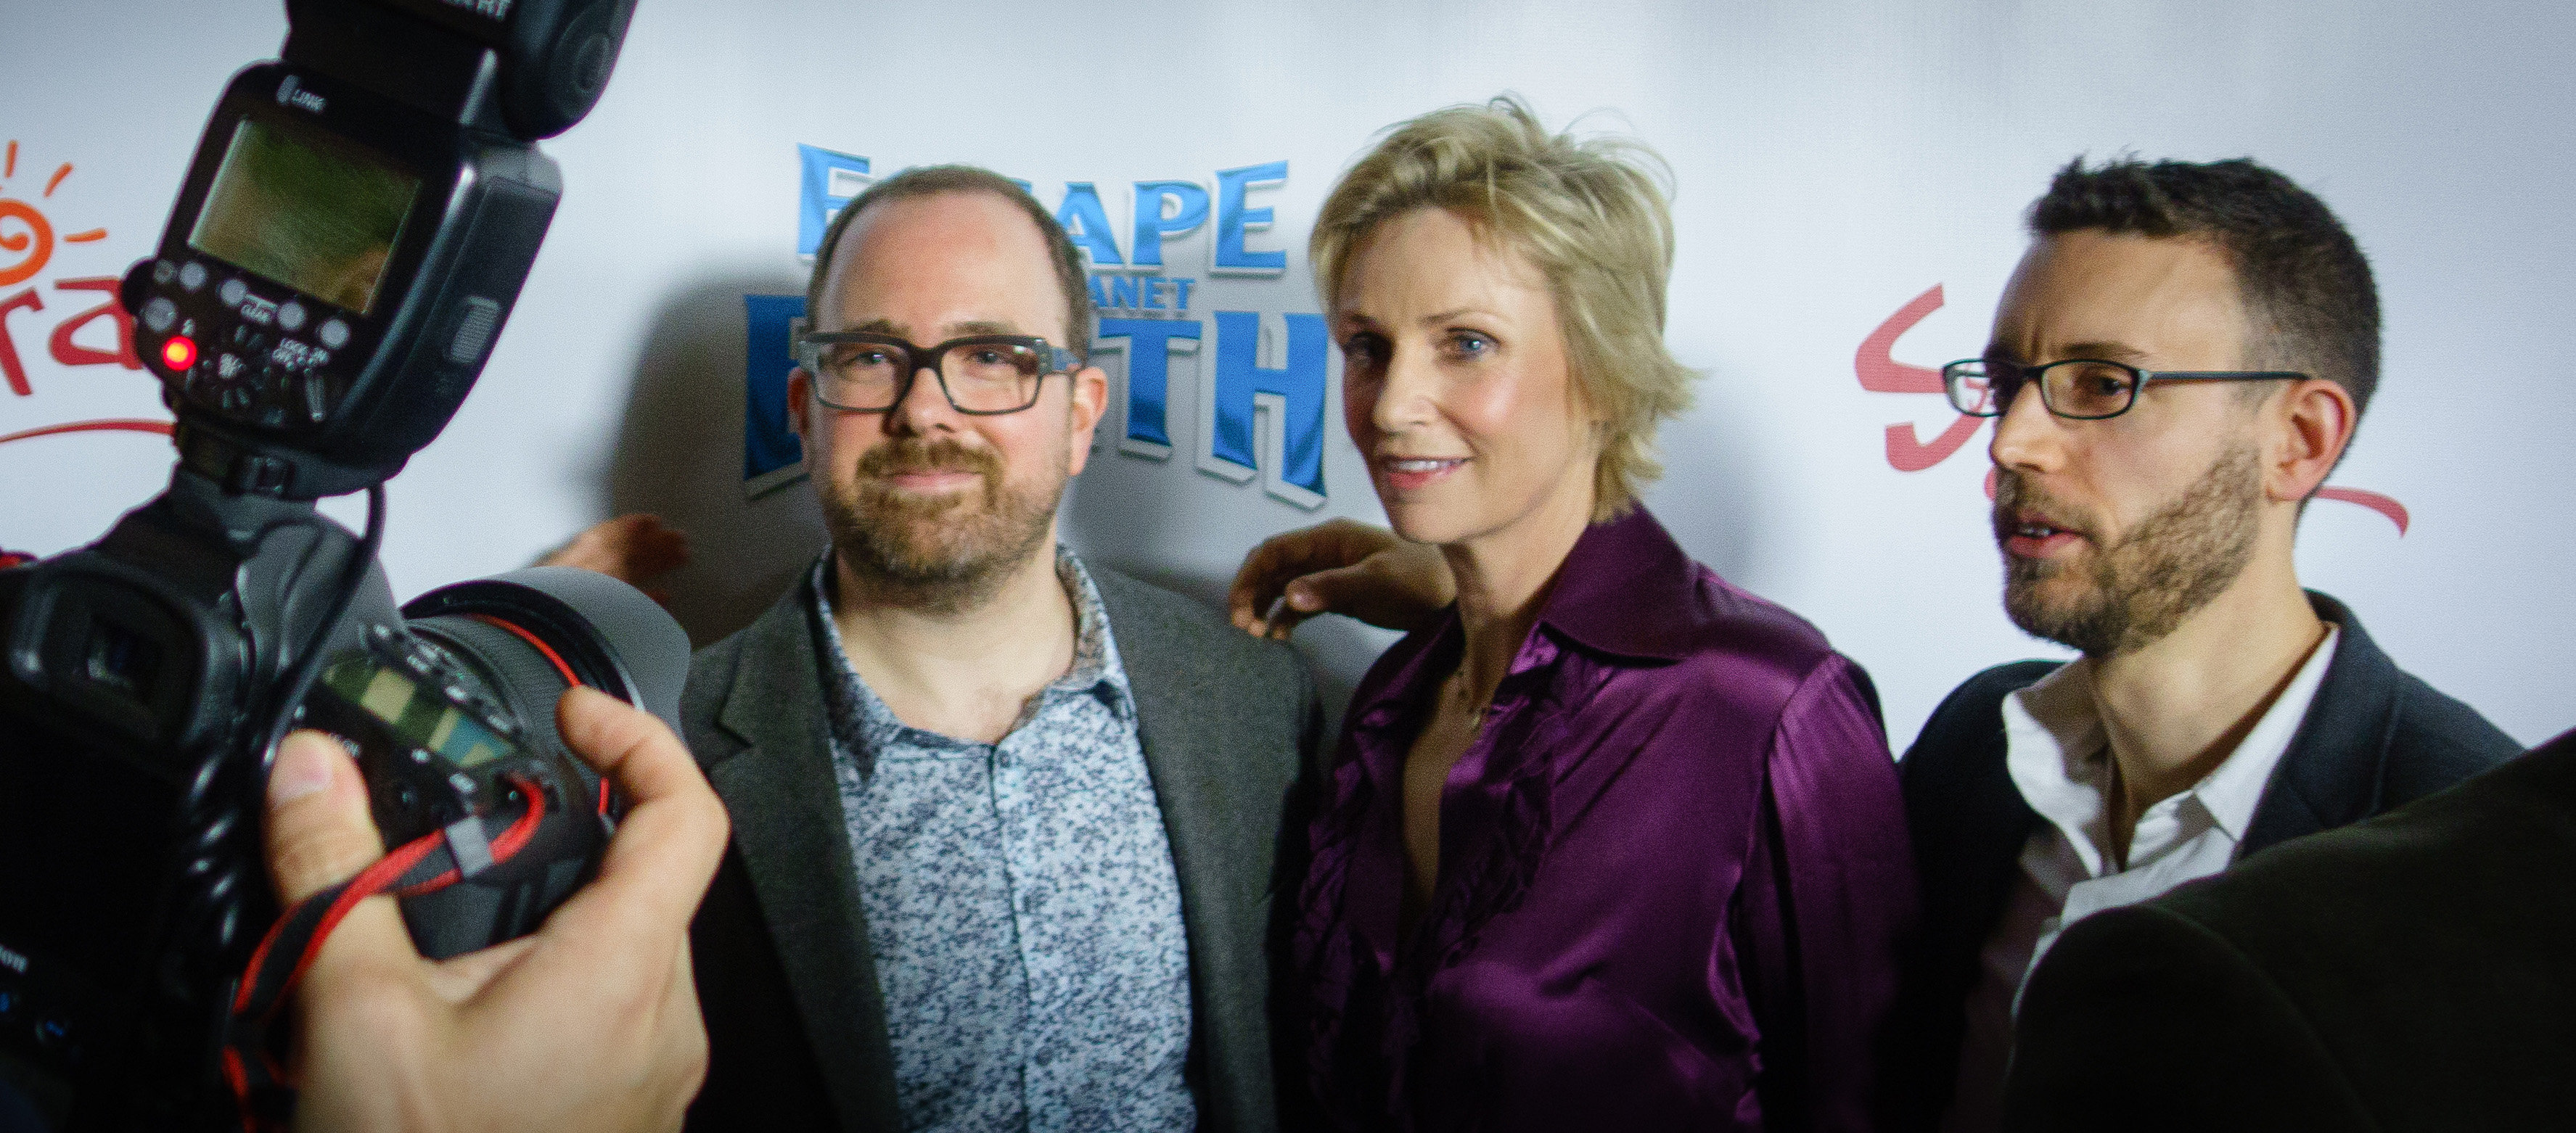 Cal Brunker, Jane Lynch, and Bob Barlen at the Hollywood premiere of Escape From Planet Earth